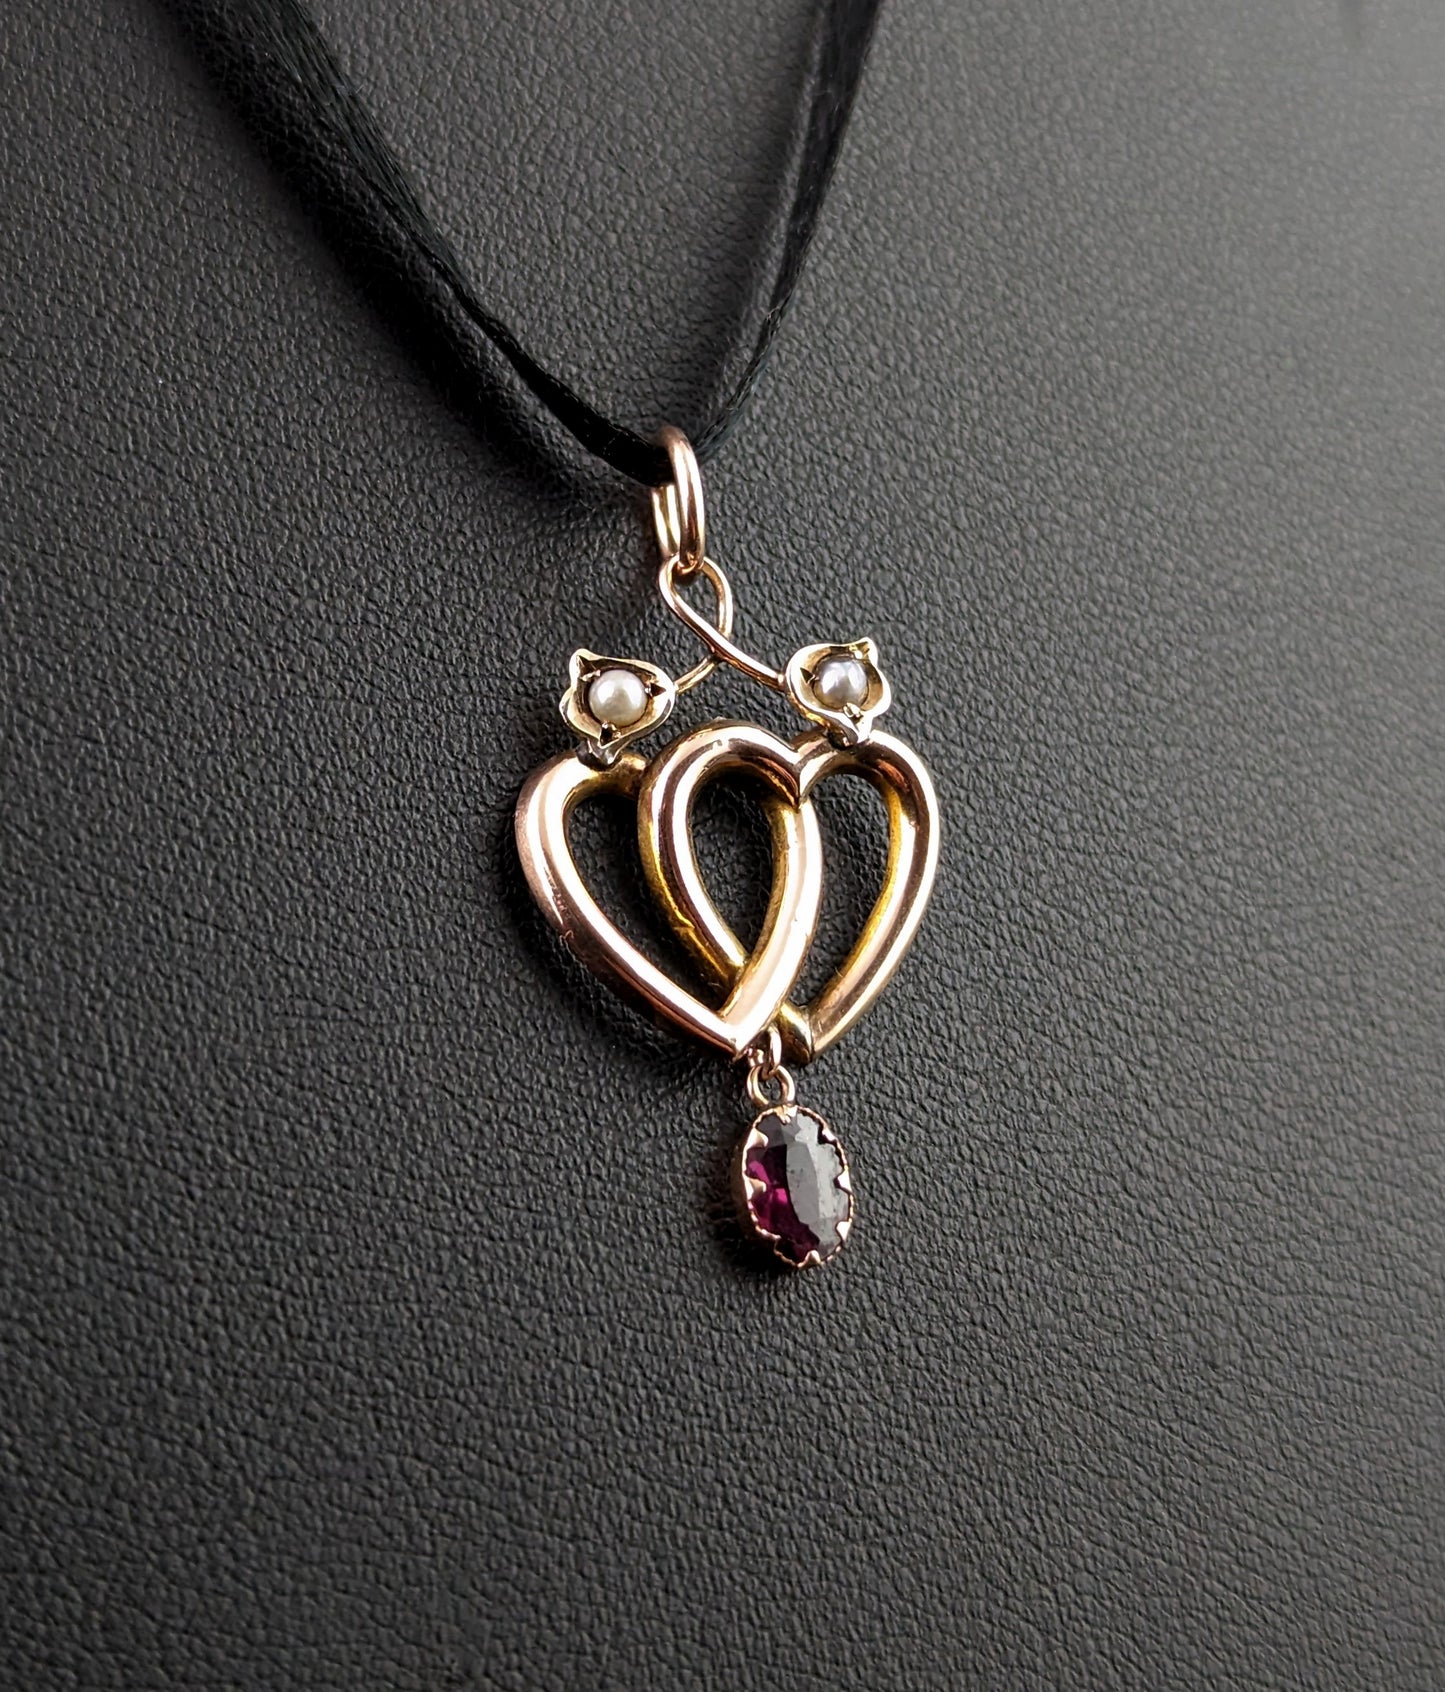 Antique 9ct gold double heart dropper pendant, Garnet and pearl